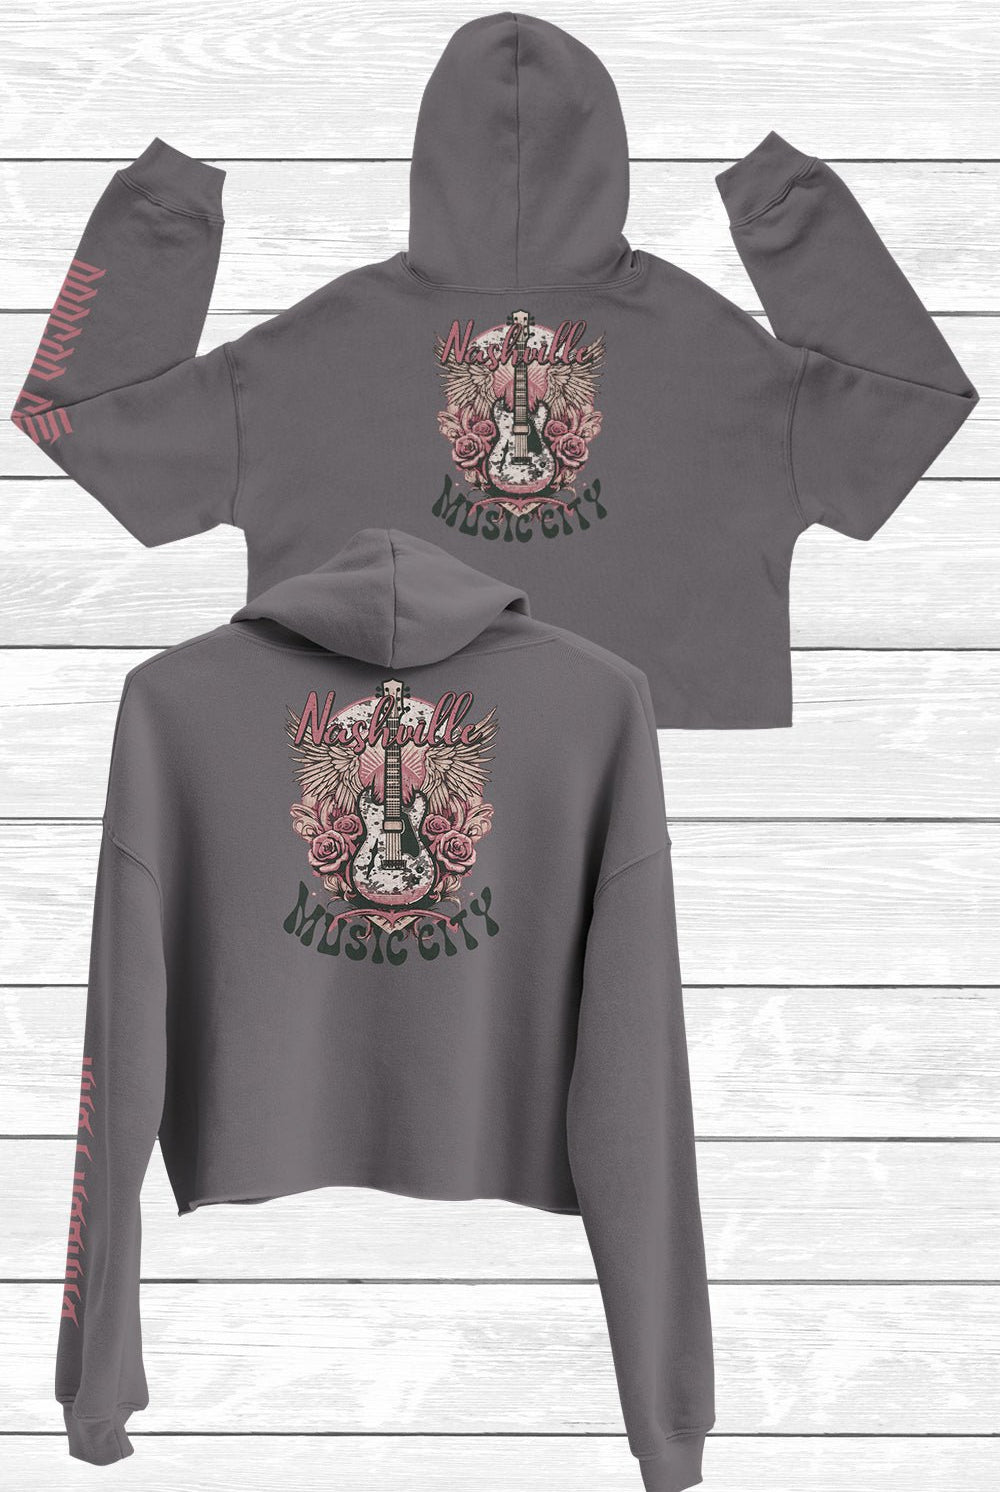 COUNTRY Girl - Nashville Music City Crop Hoodie - COUNTRY Girl - Nashville Music City Crop Hoodie - DRAGON FOXX™ - 8586252_9633 - Black - S - Crop Hoodie - Black Crop Hoodie - Black Hoodie - Country Girl